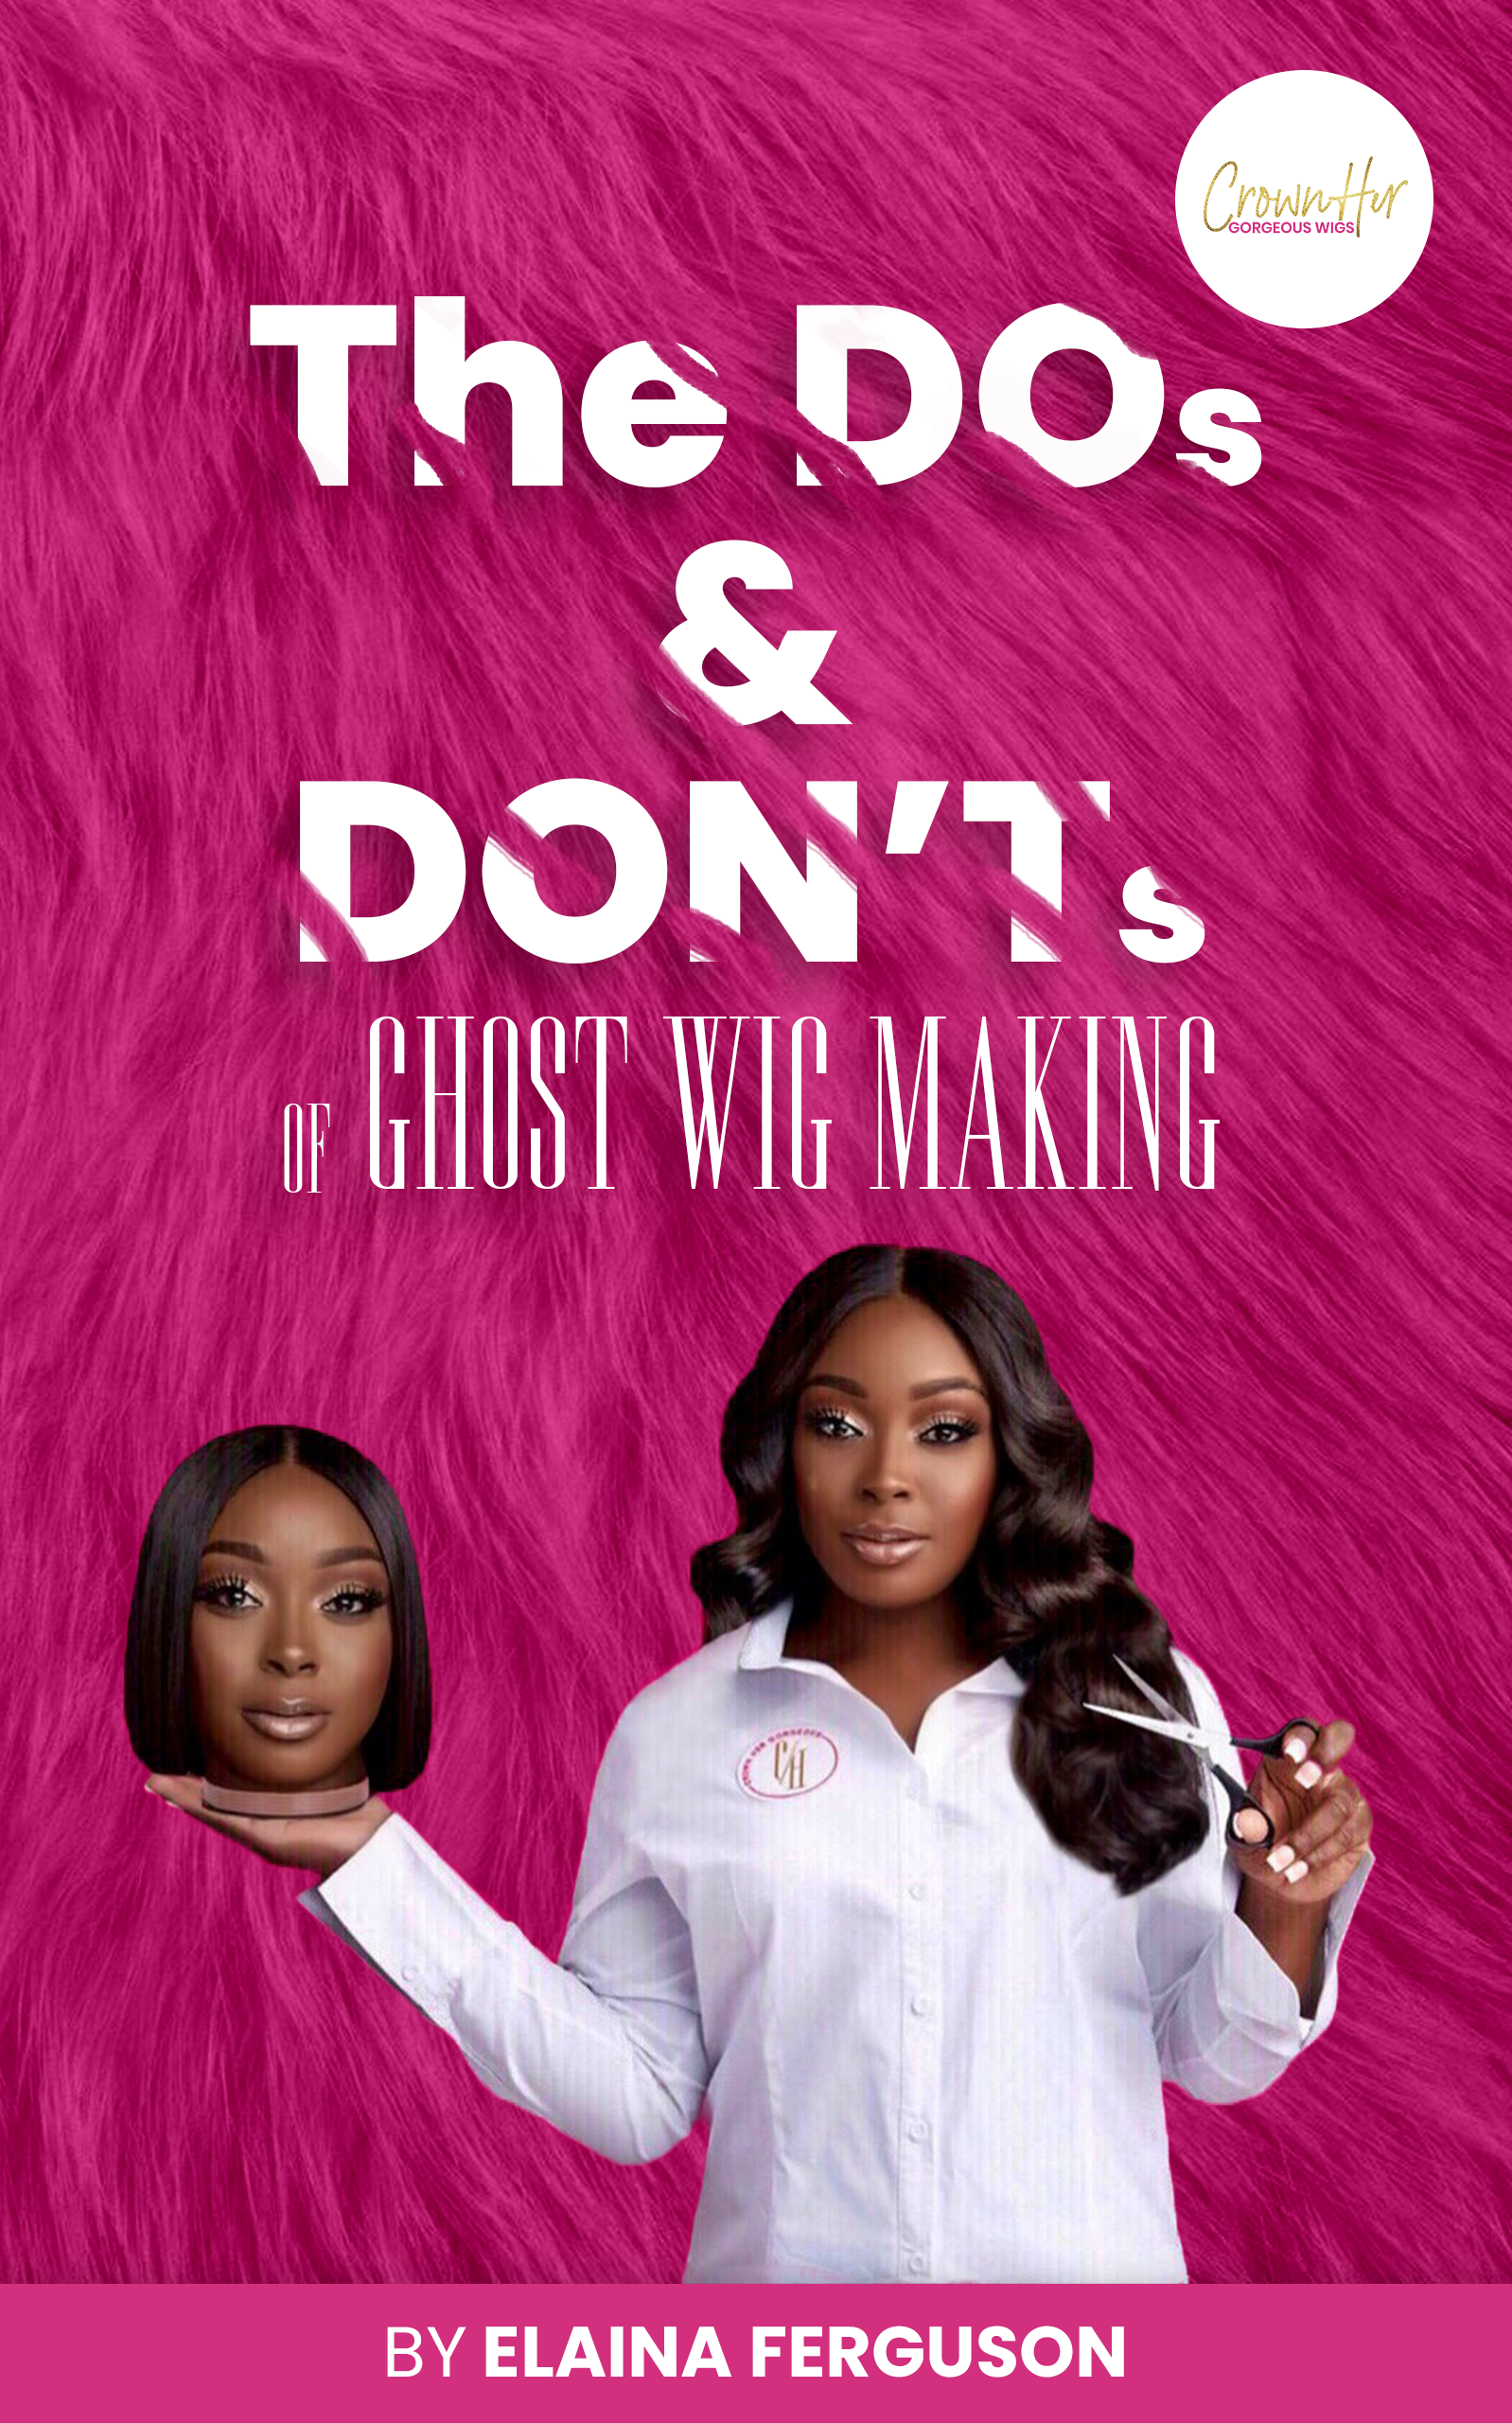 The Do’s and Don’ts of Ghost Wig Making